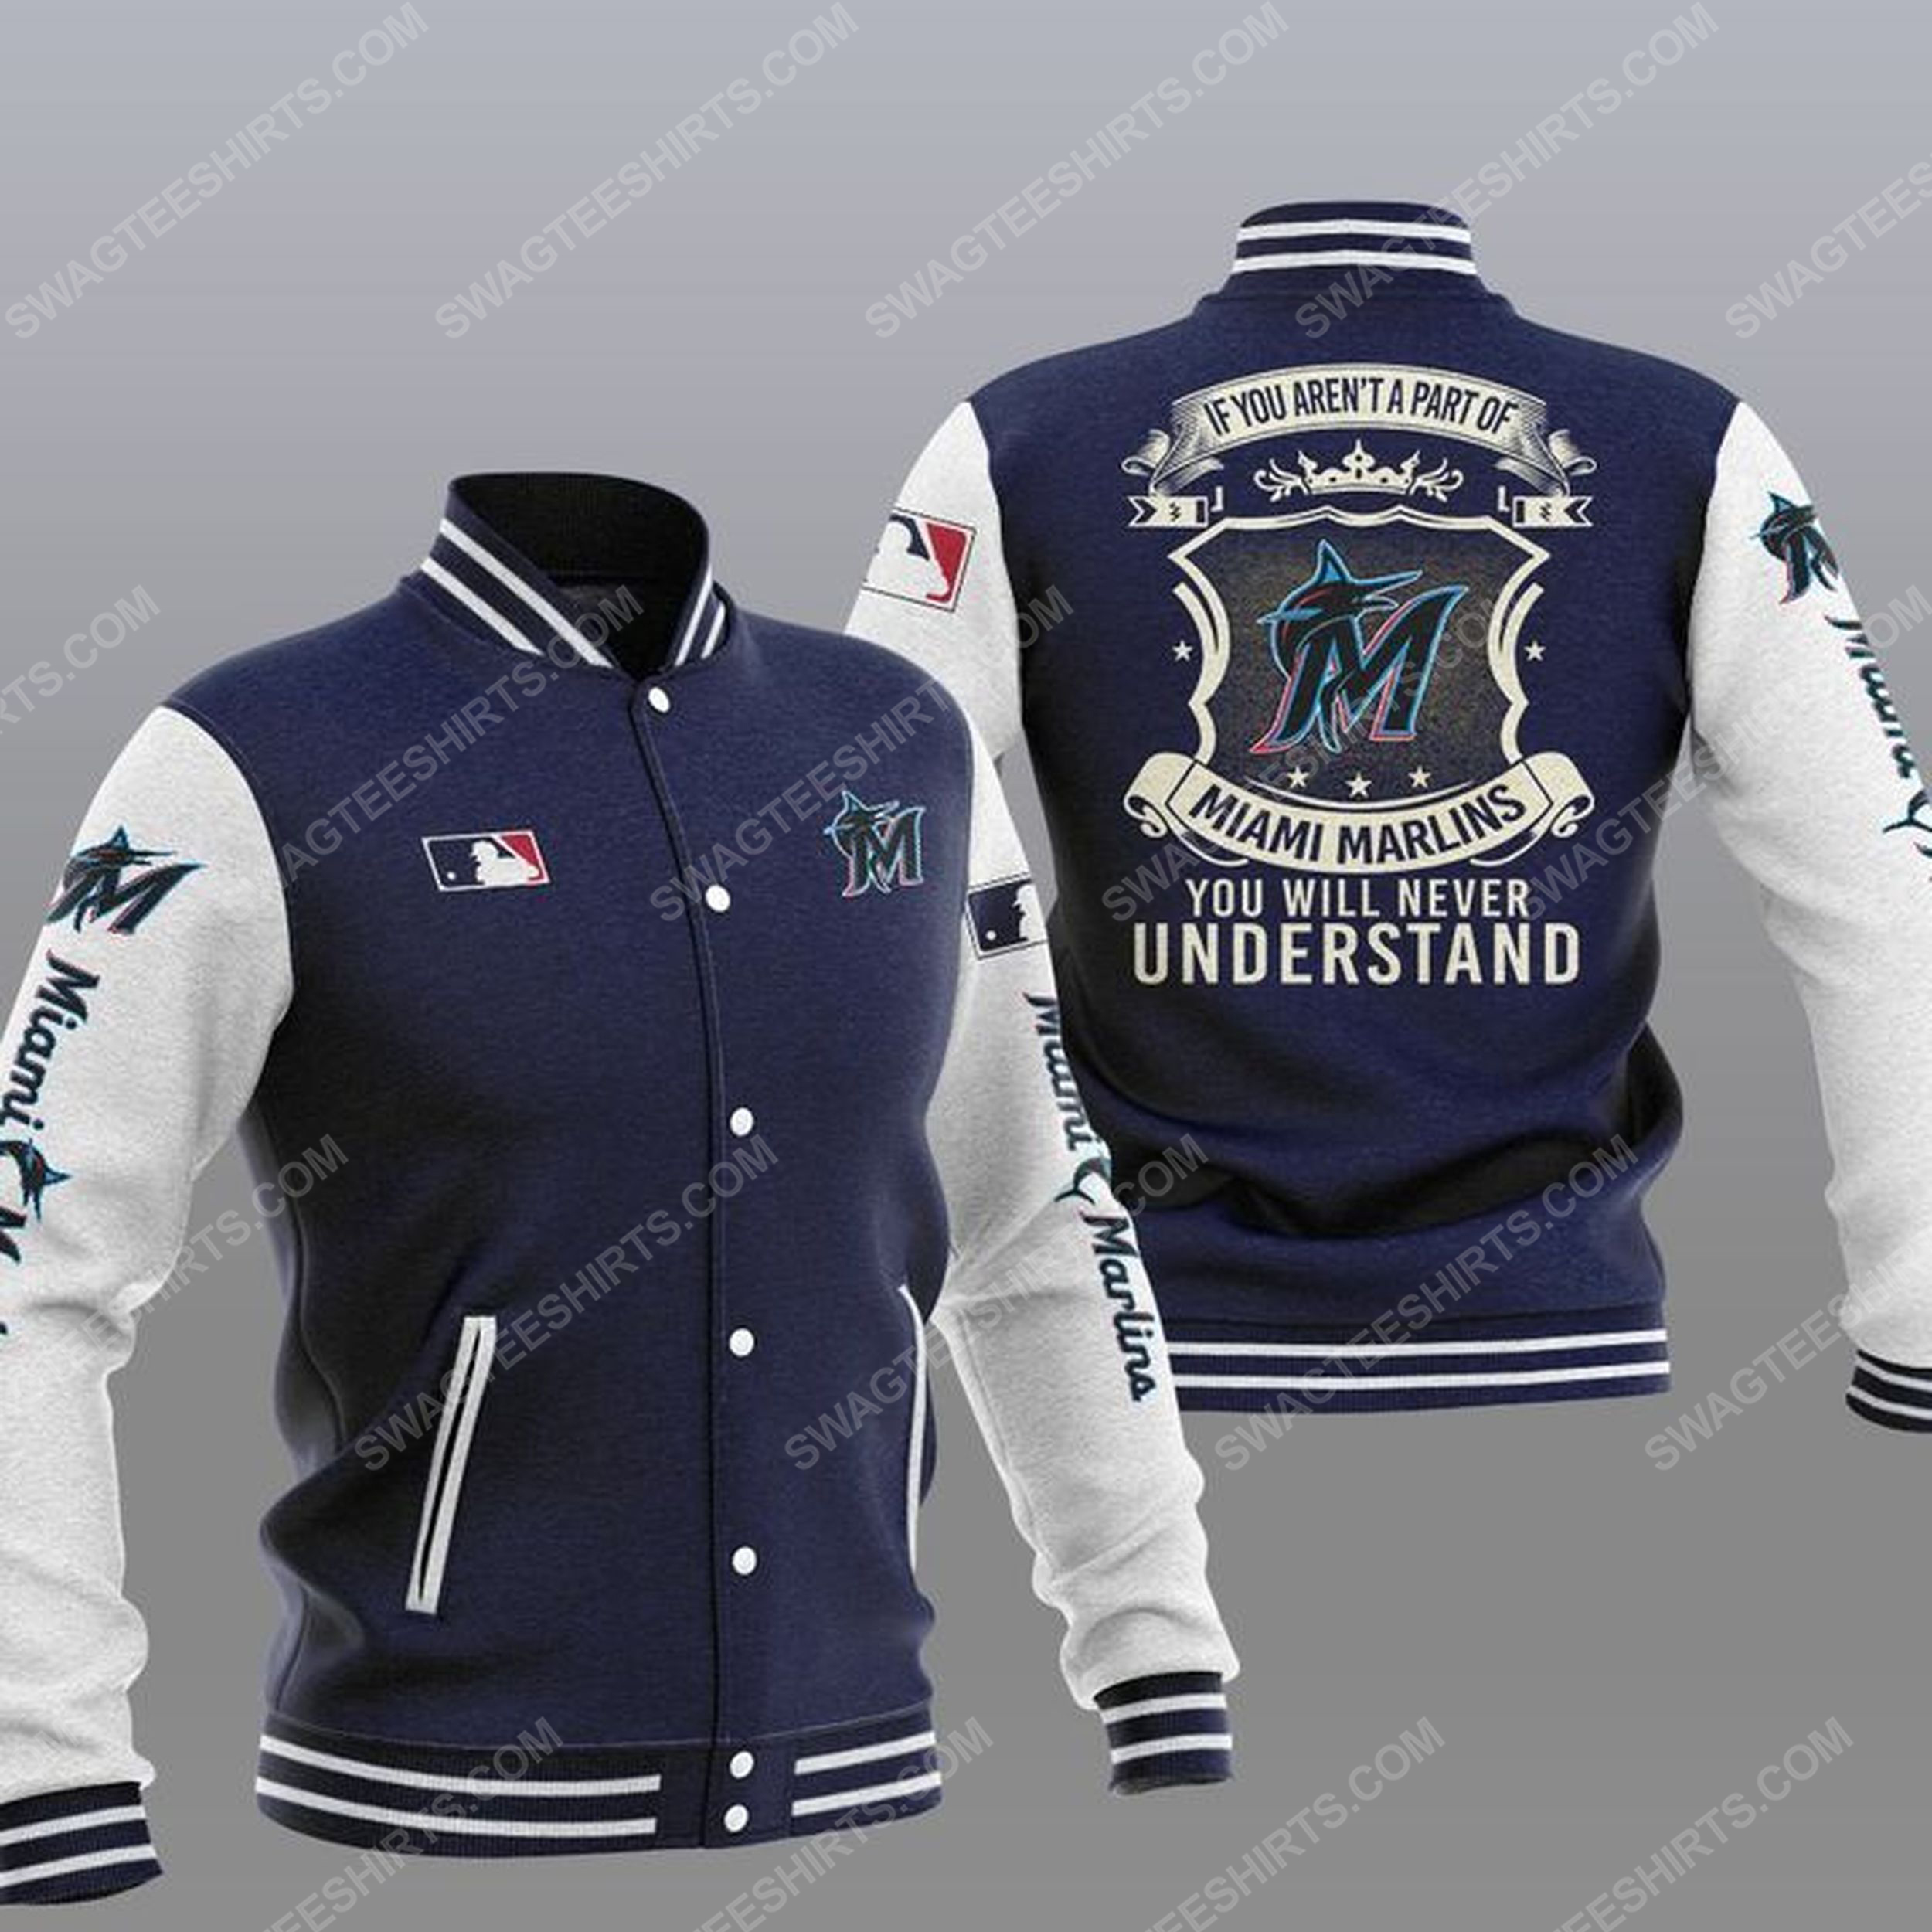 You will never understand miami marlins all over print baseball jacket - navy 1